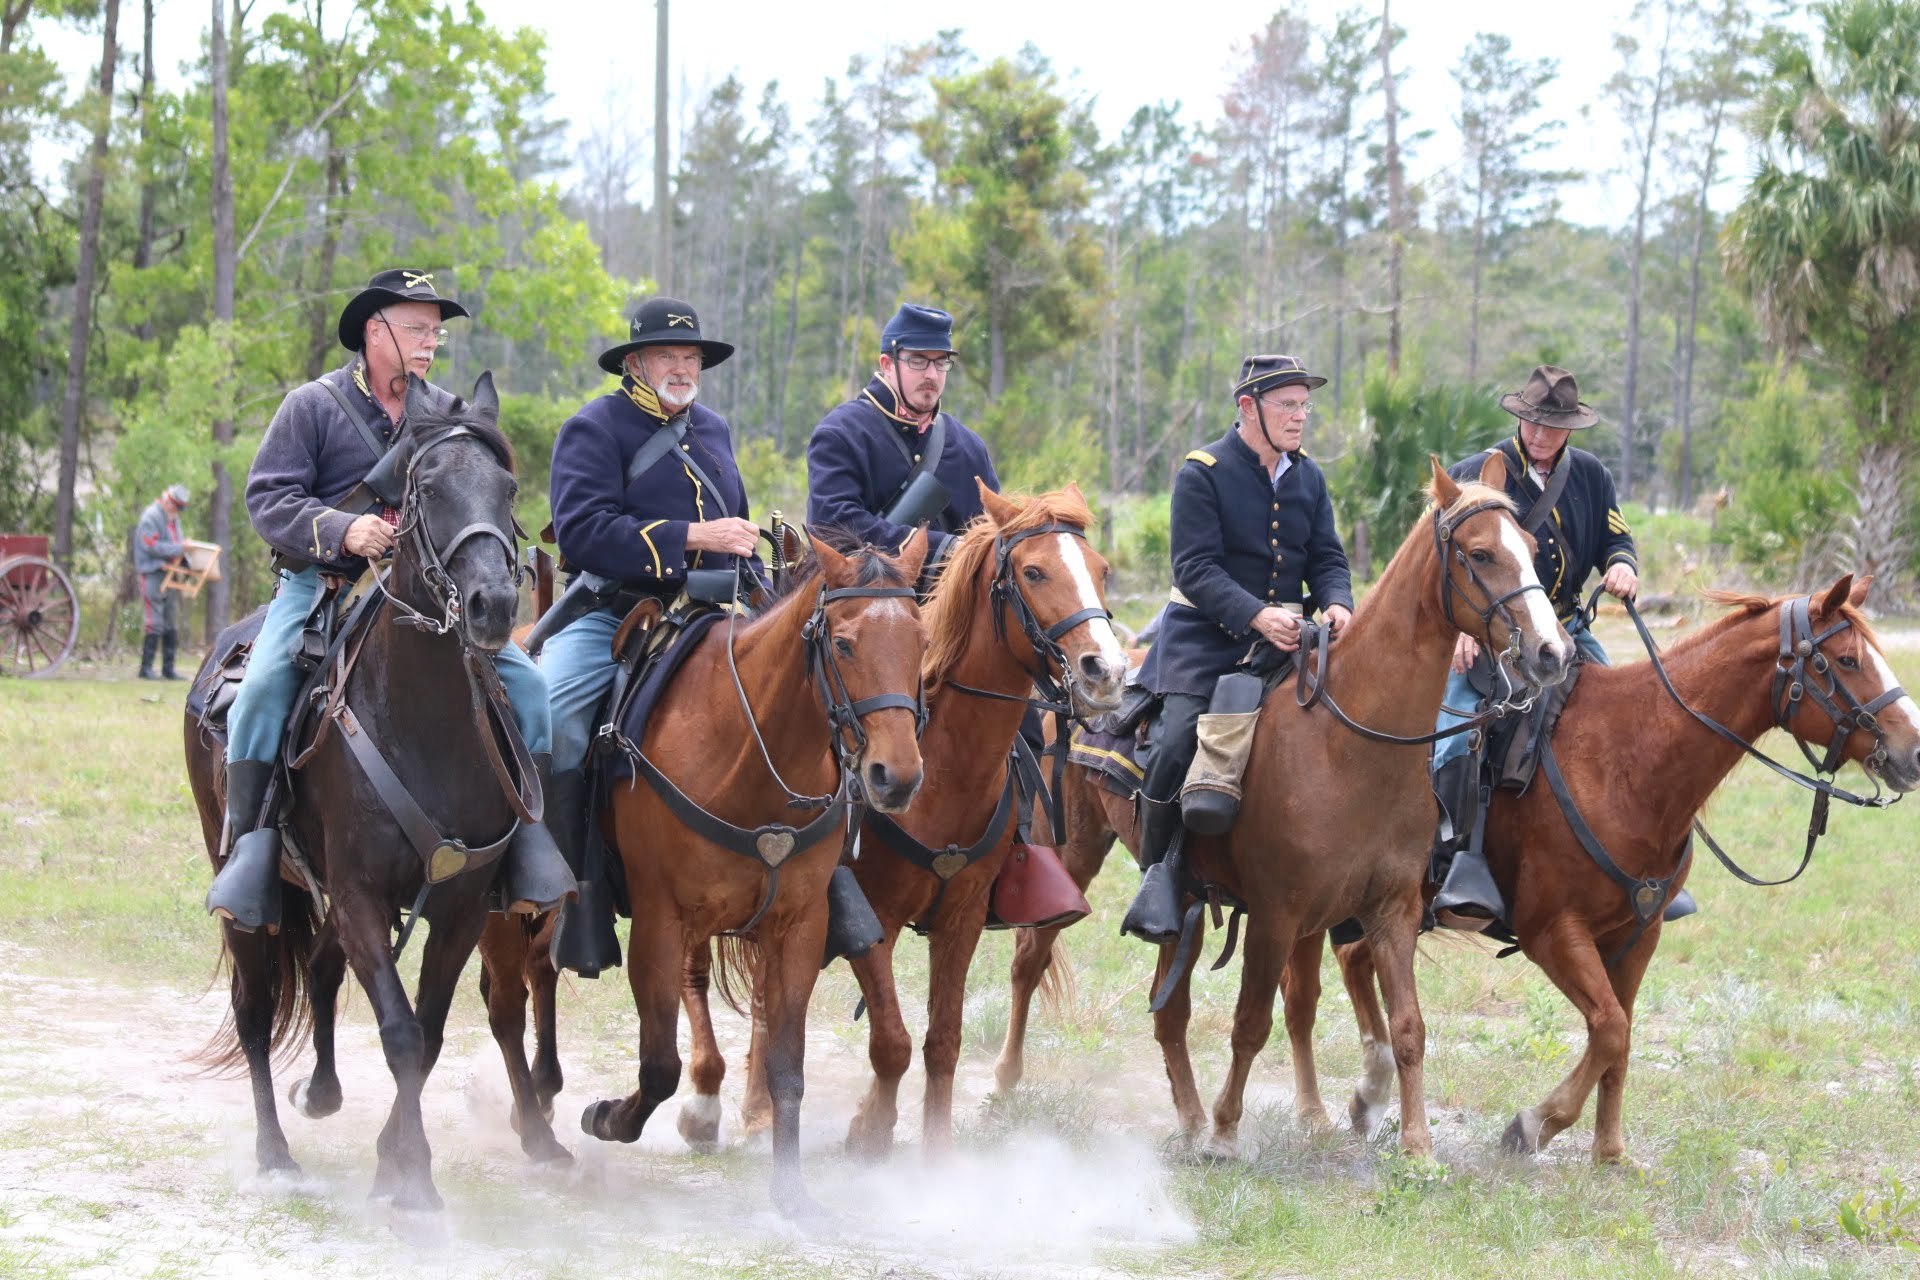 The 8th-annual Pellicer Creek Raid Civil War Reenactment took place April 6 and 7, at the Florida Agricultural Museum. Courtesy photo by Terence Larkin